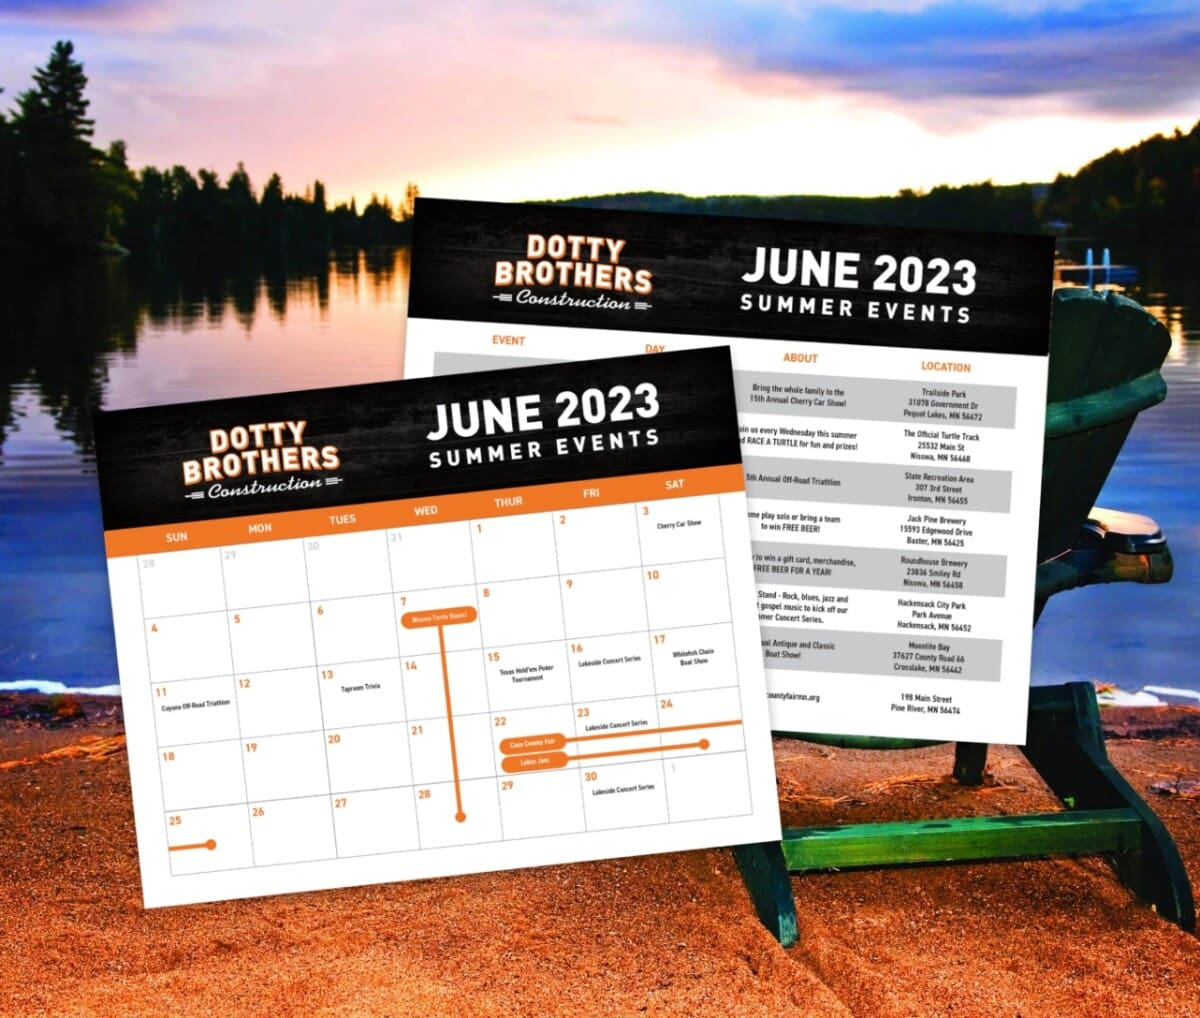 Example of the Dotty Brothers Summer Event Calendar